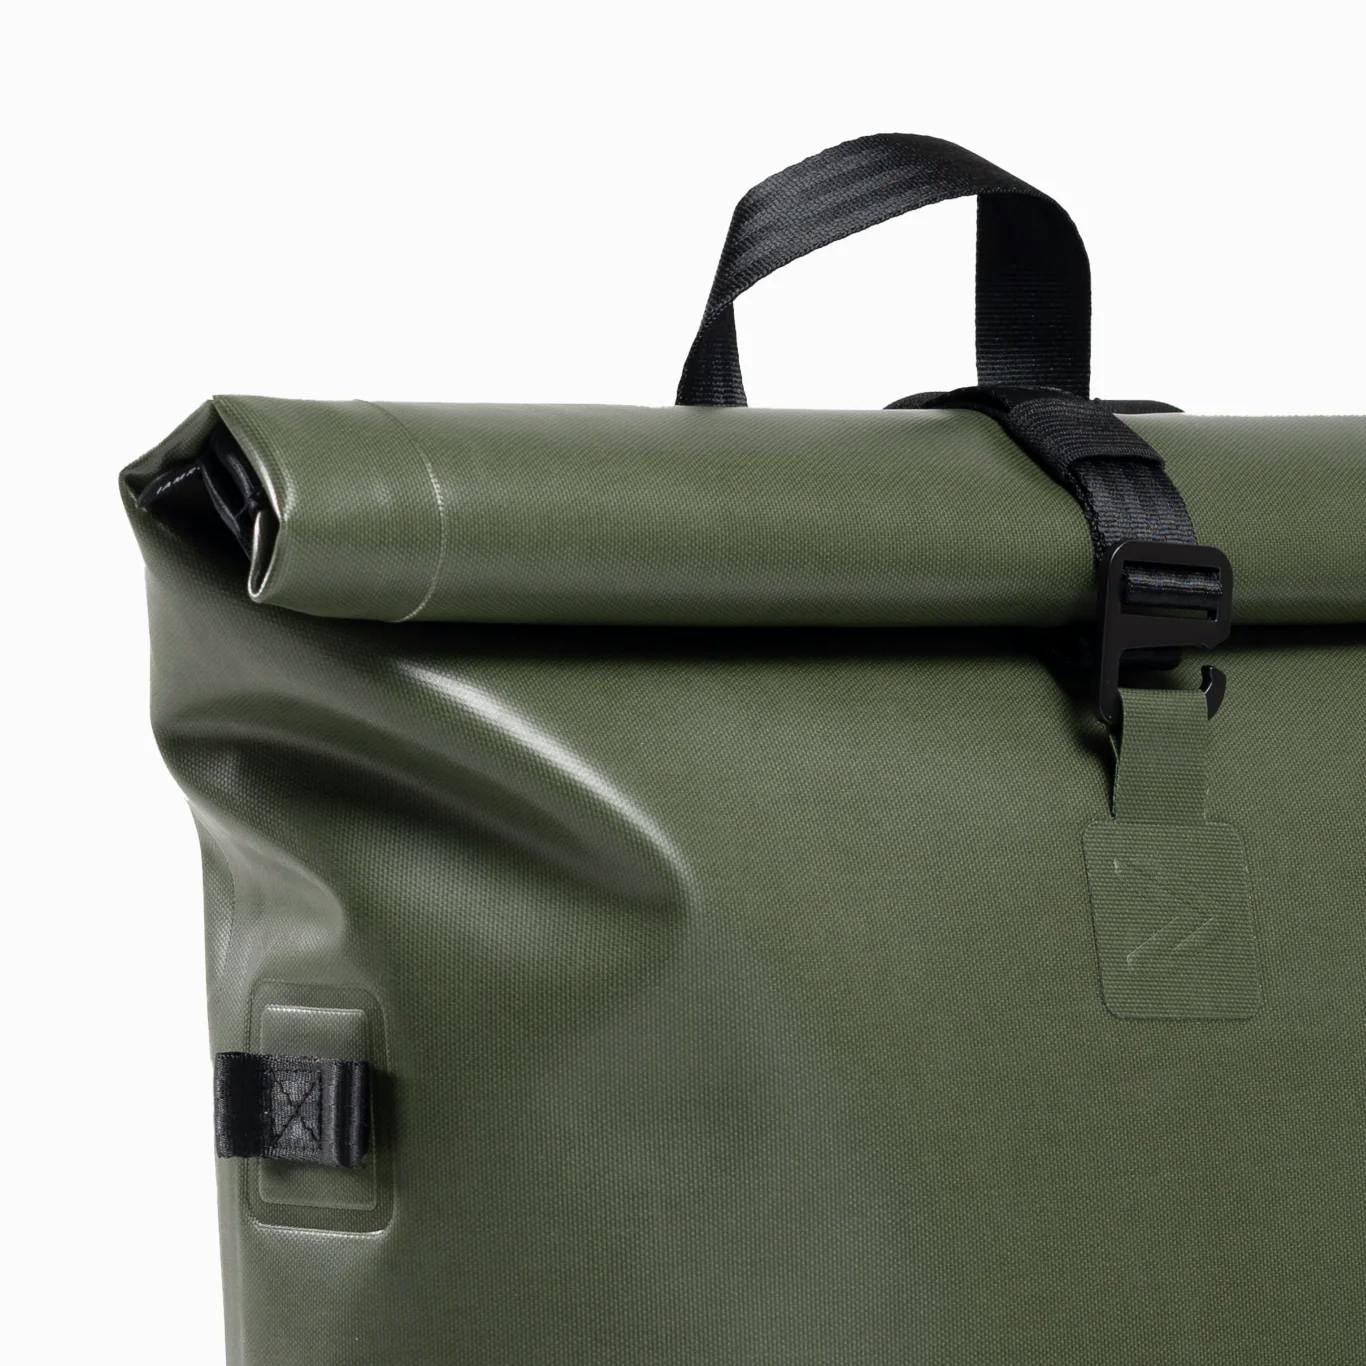 IAMRUNBOX Recycled Everyday Rolltop Green